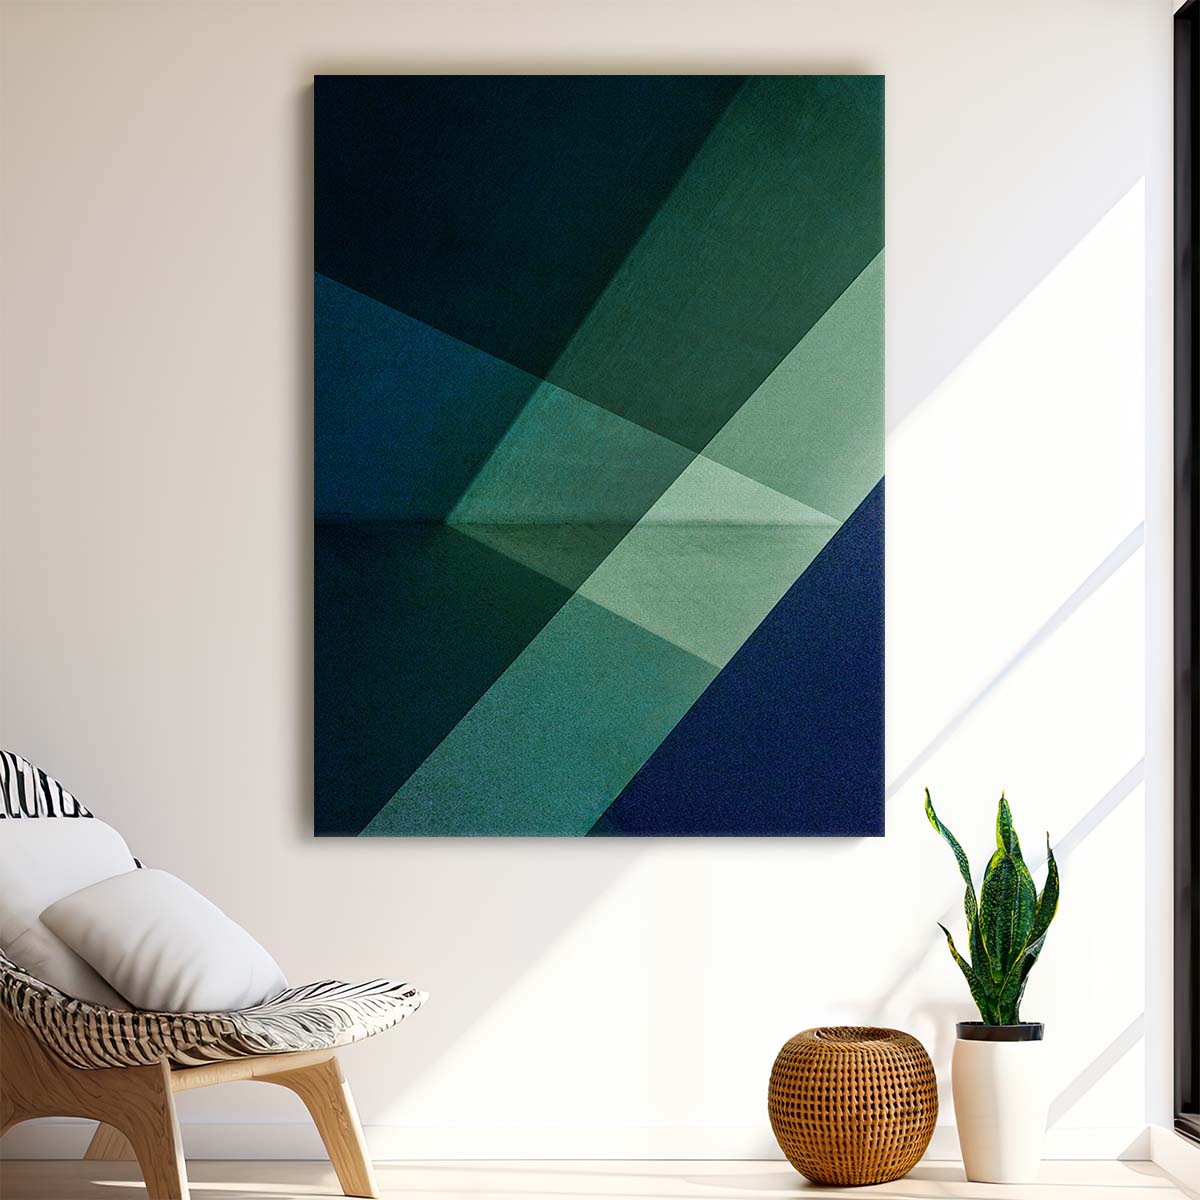 Minimalistic Lisbon Abstract Photography Blue-Green Geometric Shadows by Luxuriance Designs, made in USA